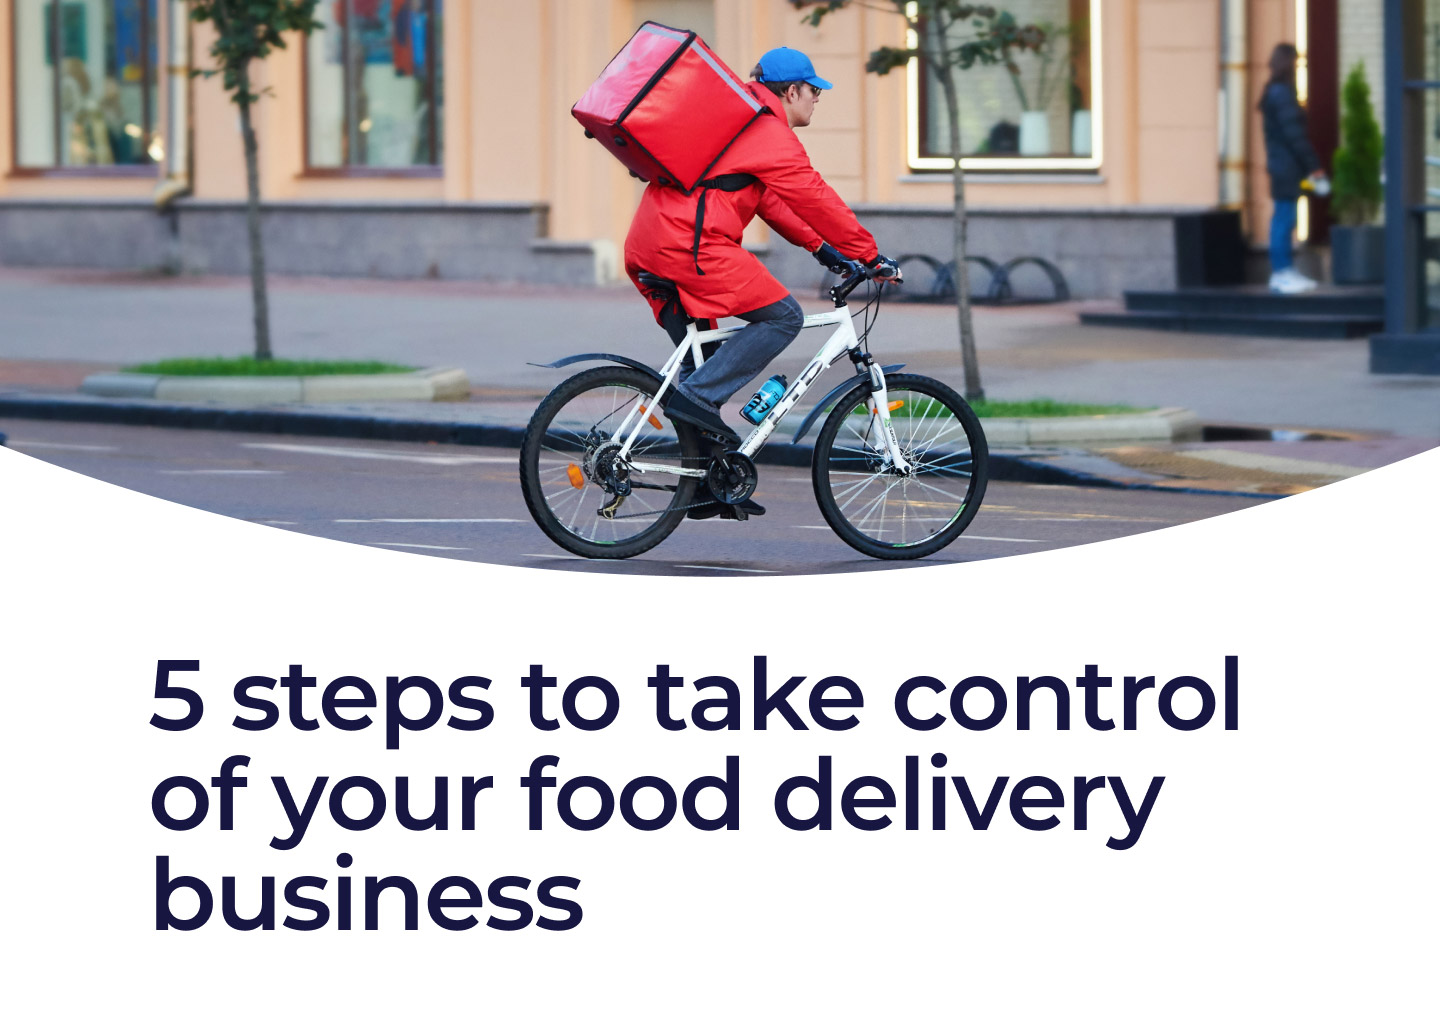 5 steps to take control of your food delivery business